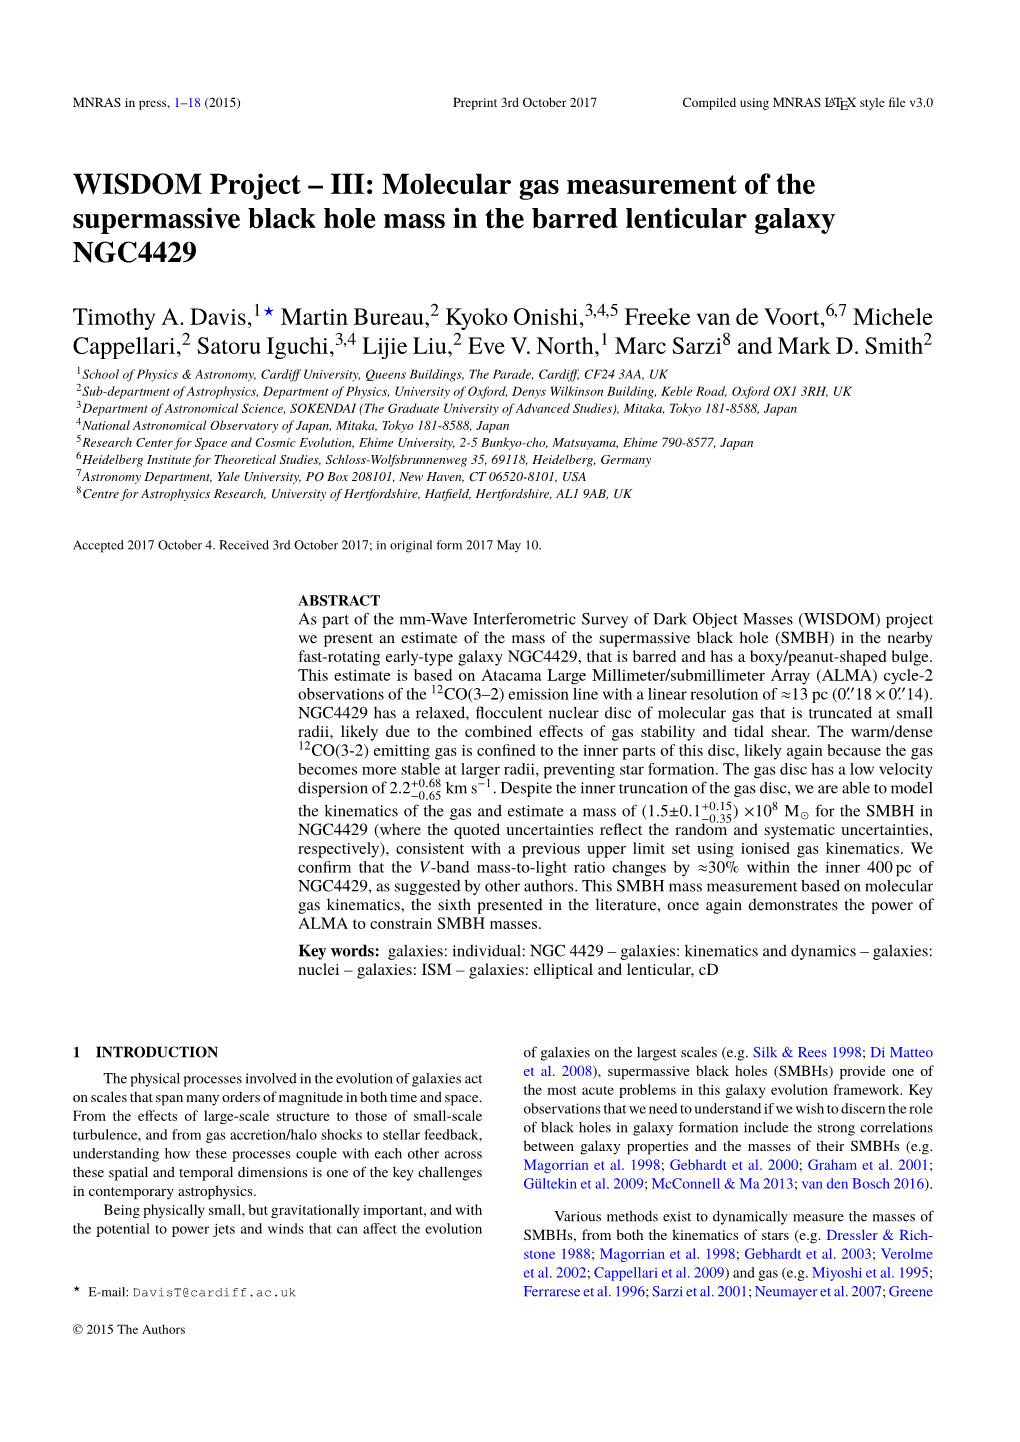 WISDOM Project – III: Molecular Gas Measurement of the Supermassive Black Hole Mass in the Barred Lenticular Galaxy NGC4429